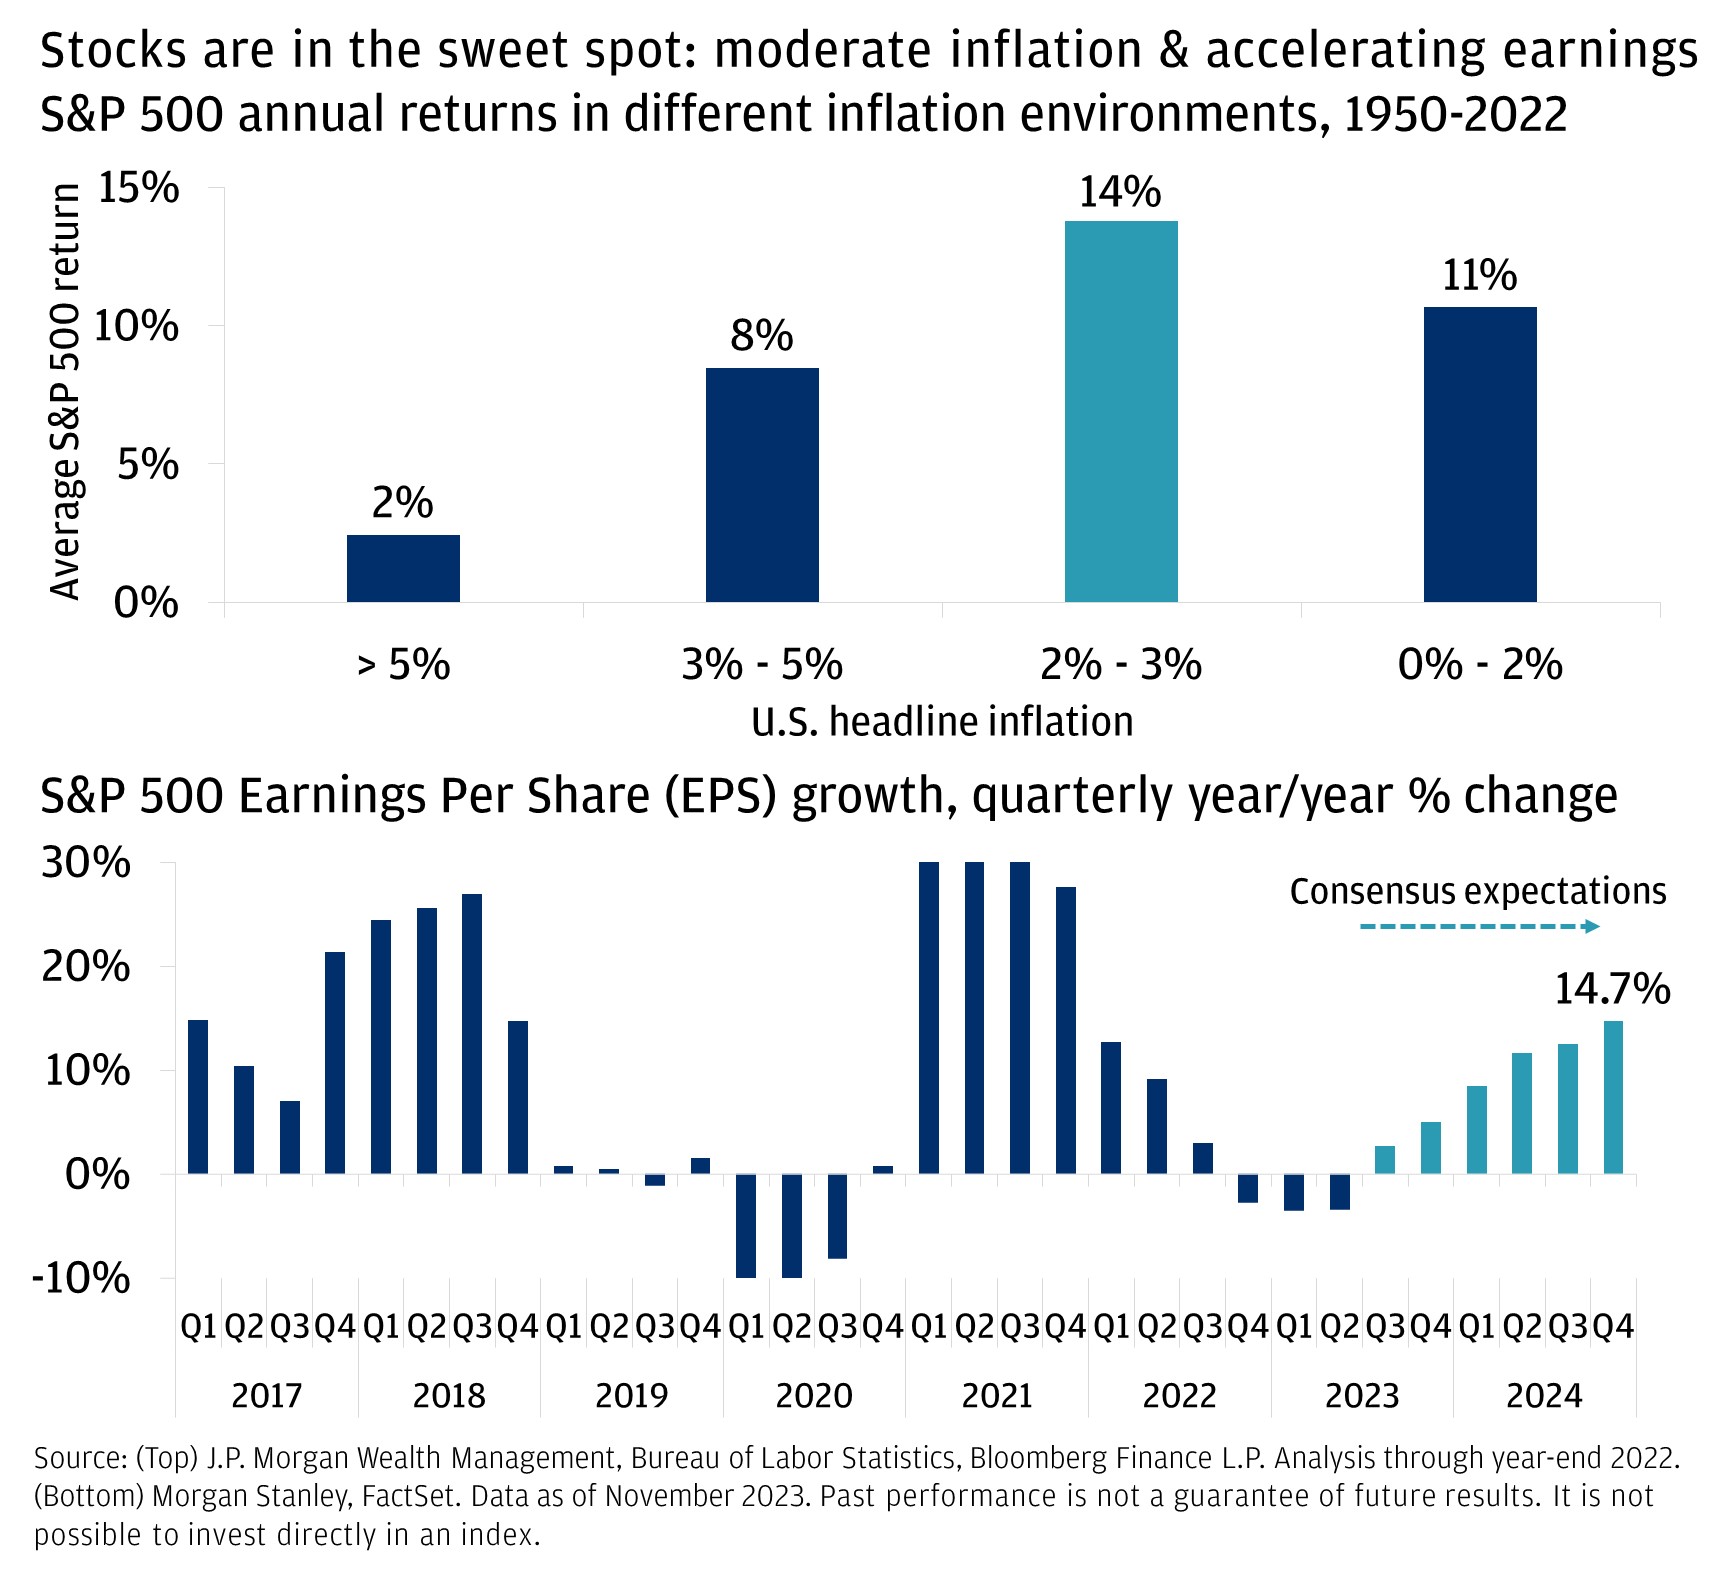 Stocks are in the sweet spot: moderate inflation & accelerating earnings